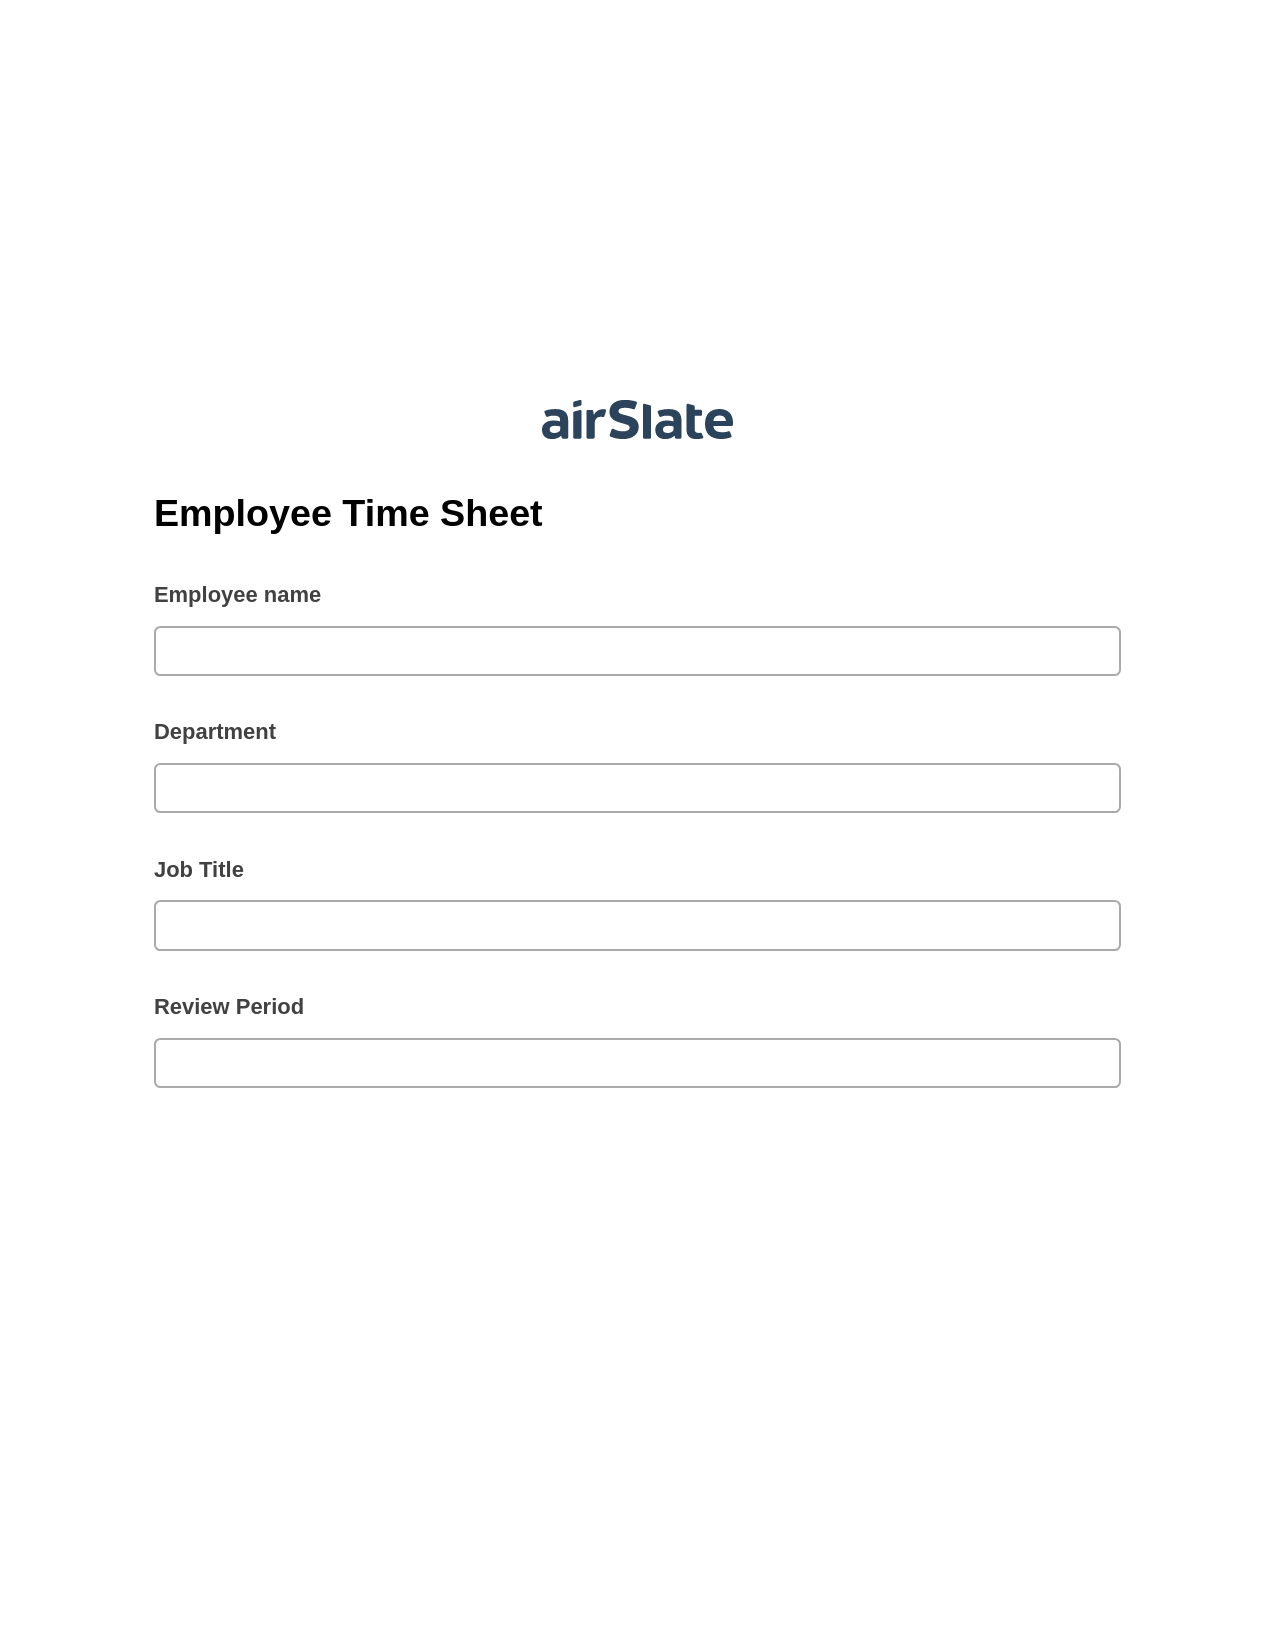 Employee Time Sheet Pre-fill Dropdowns from Excel Bot, Create slate addon, Archive to Box Bot